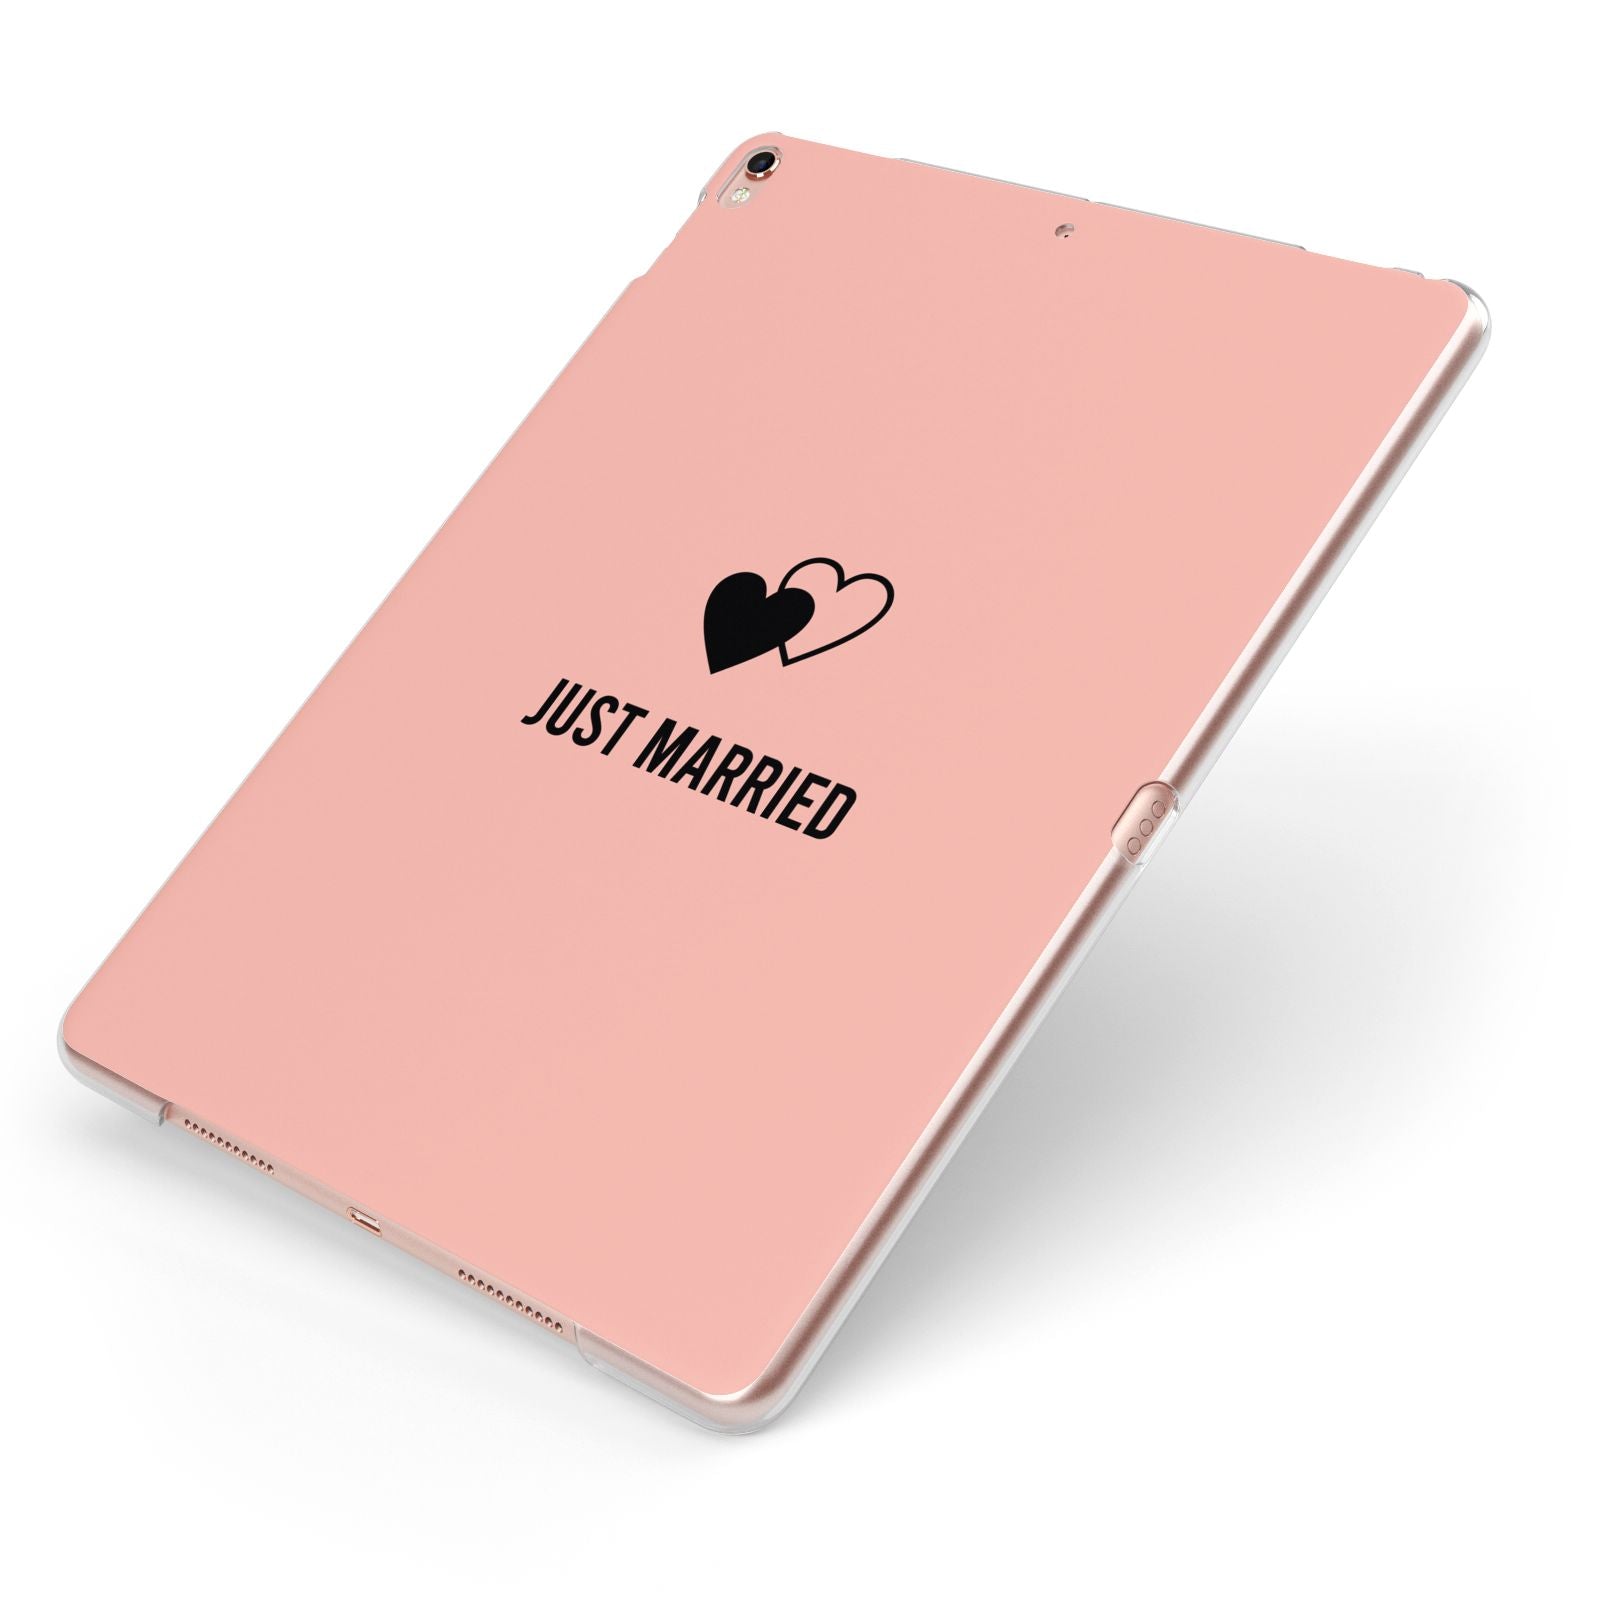 Just Married Apple iPad Case on Rose Gold iPad Side View